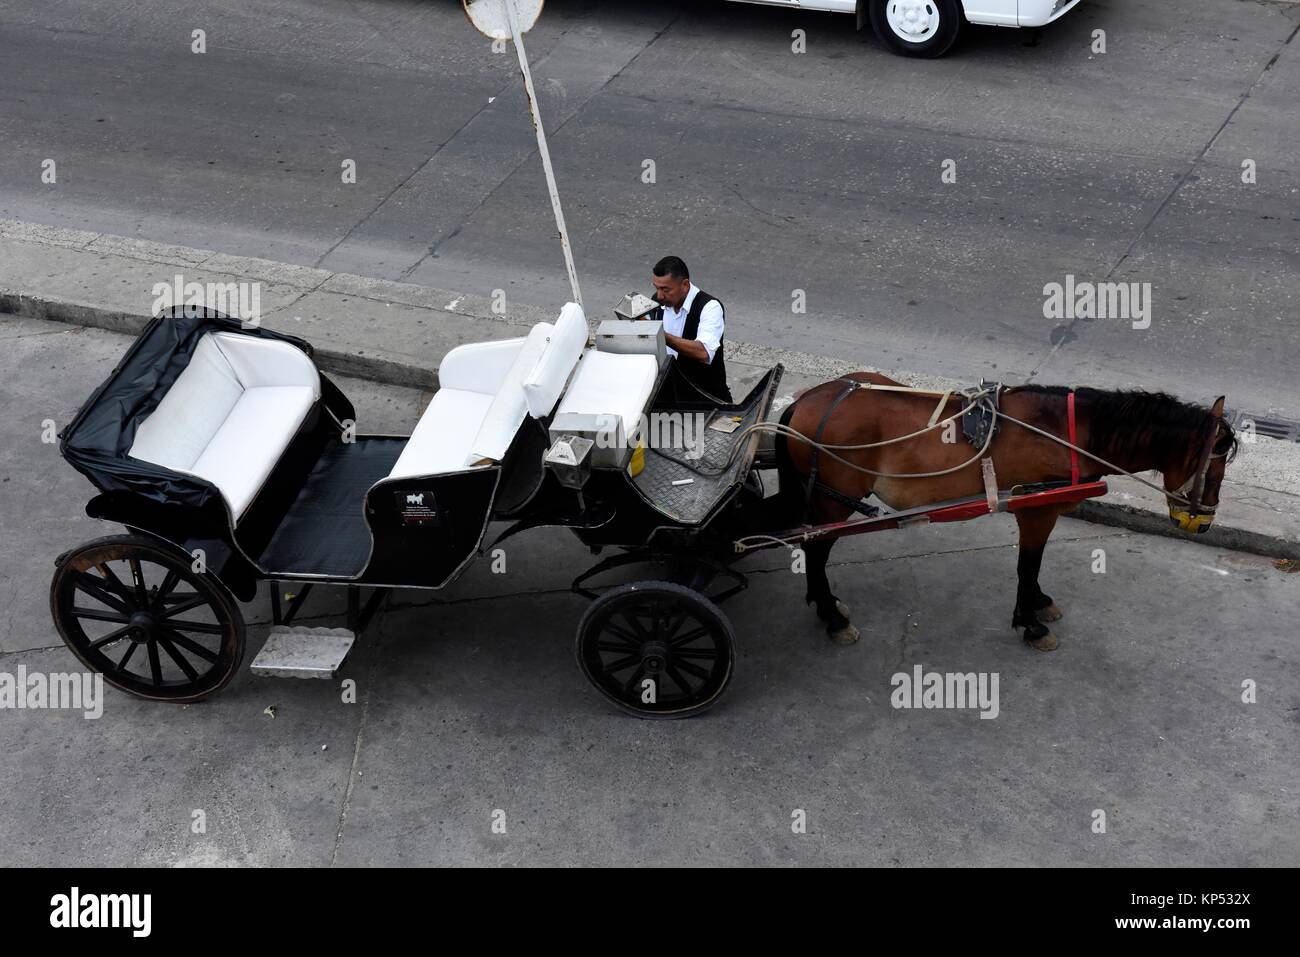 Horse drawn carriage, old town, Cartagena, Colombia. Stock Photo